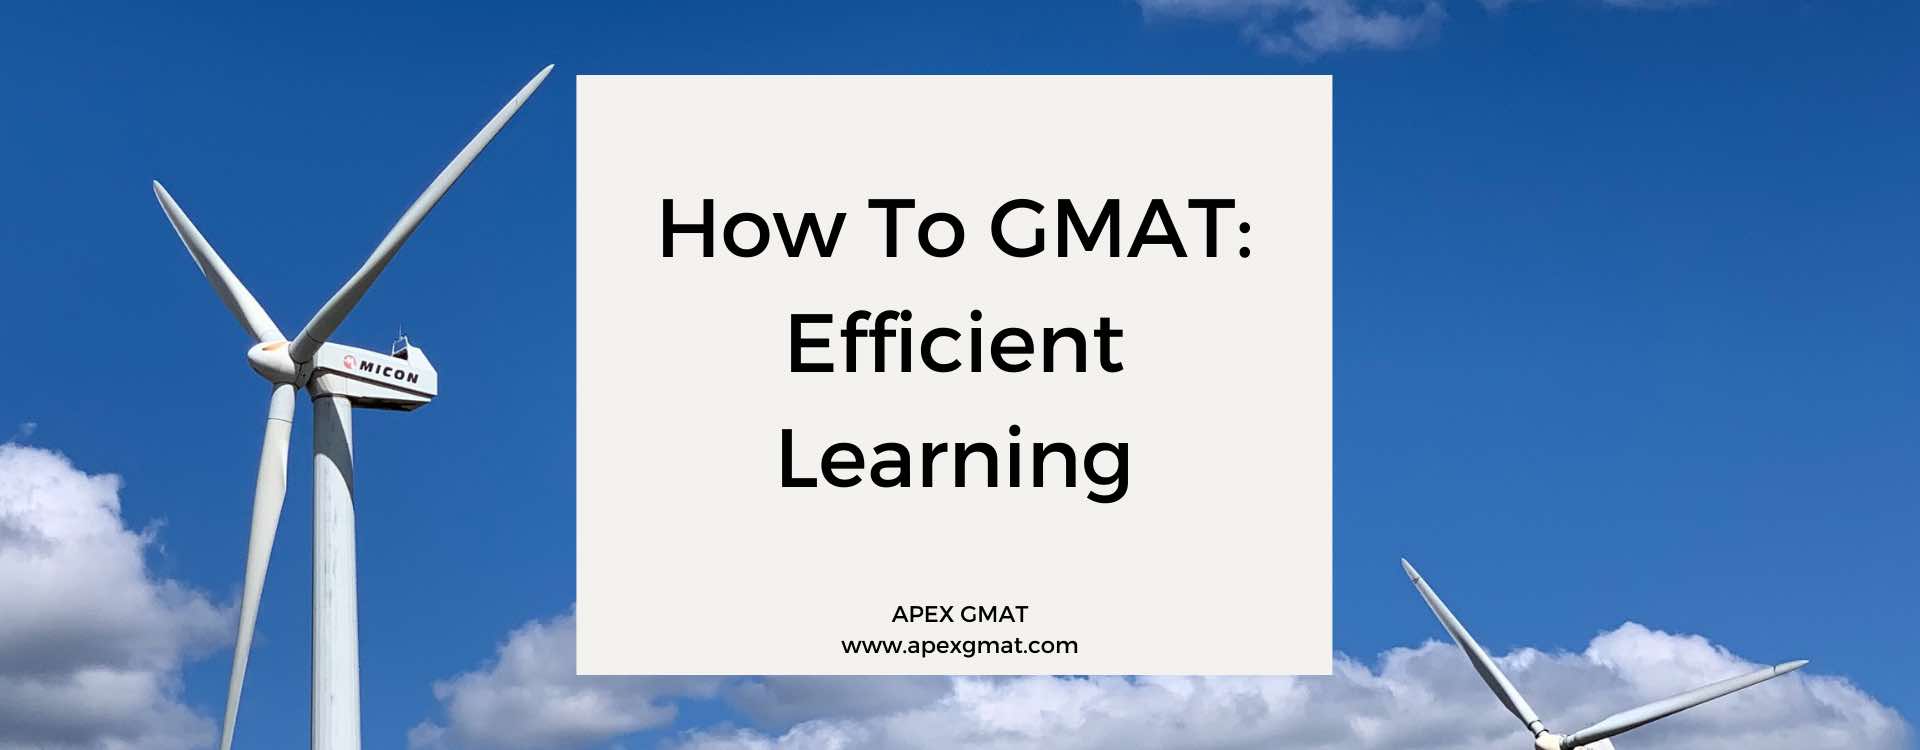 How To GMAT: Efficient Learning